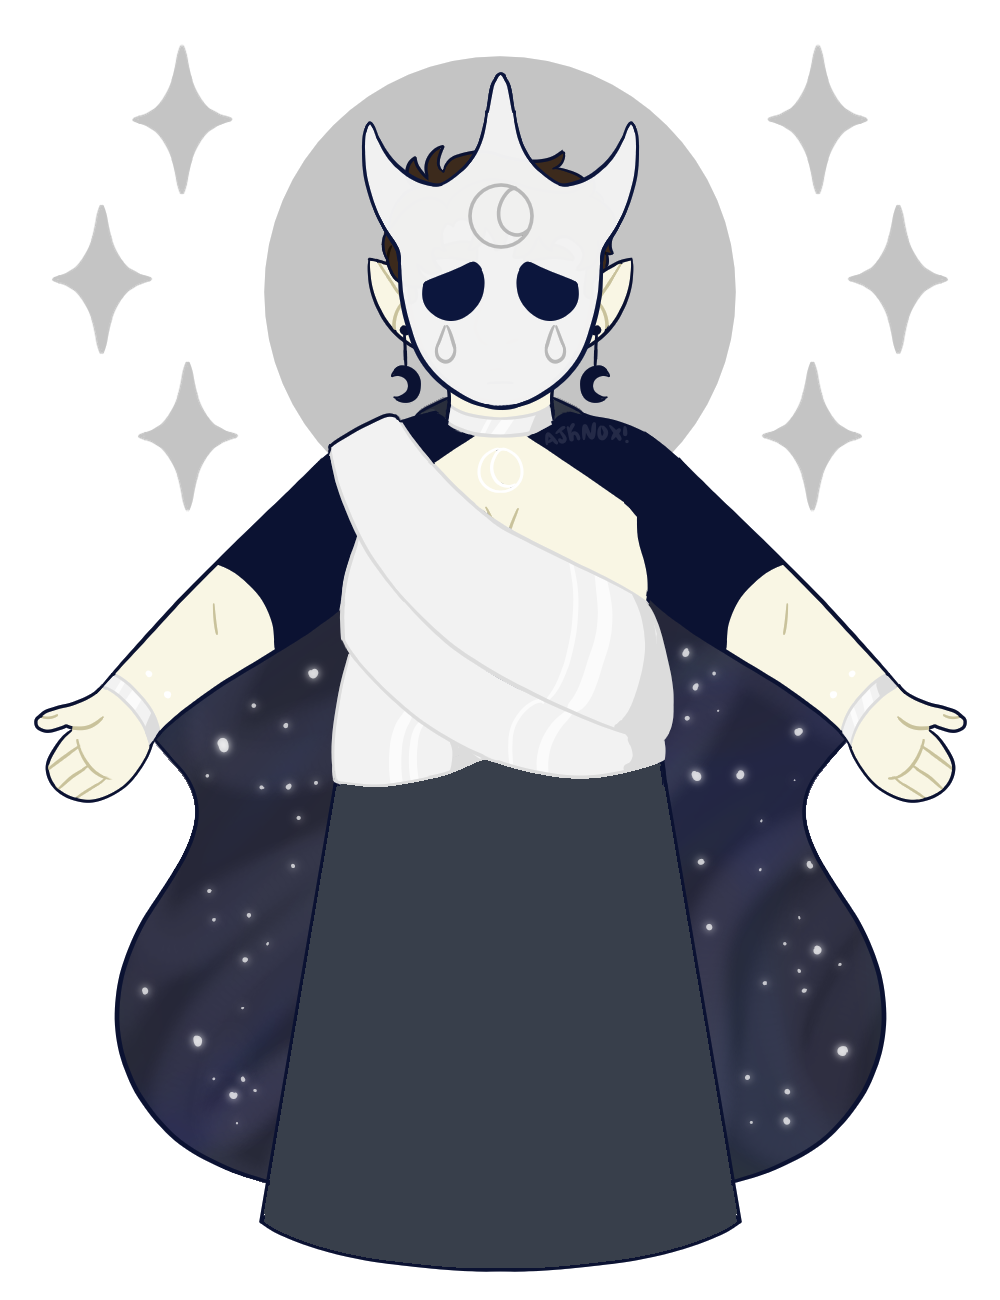 Haliya, a very pale chubby humanoid with pointy ears. They're wearing moon earrings, a dark skirt, and a silver wrapping around their chest. They have a cape attached to silver bracelets, the inside of which shows a night sky. They're also wearing a silver mask with three horns. The mask has a sad expression, with tears coming from the eyes and a moon symbol on the forehead. The same moon symbol is tattoed on their chest in white. The background is white, and in gray behind their head is a circle surrounded by six stars.